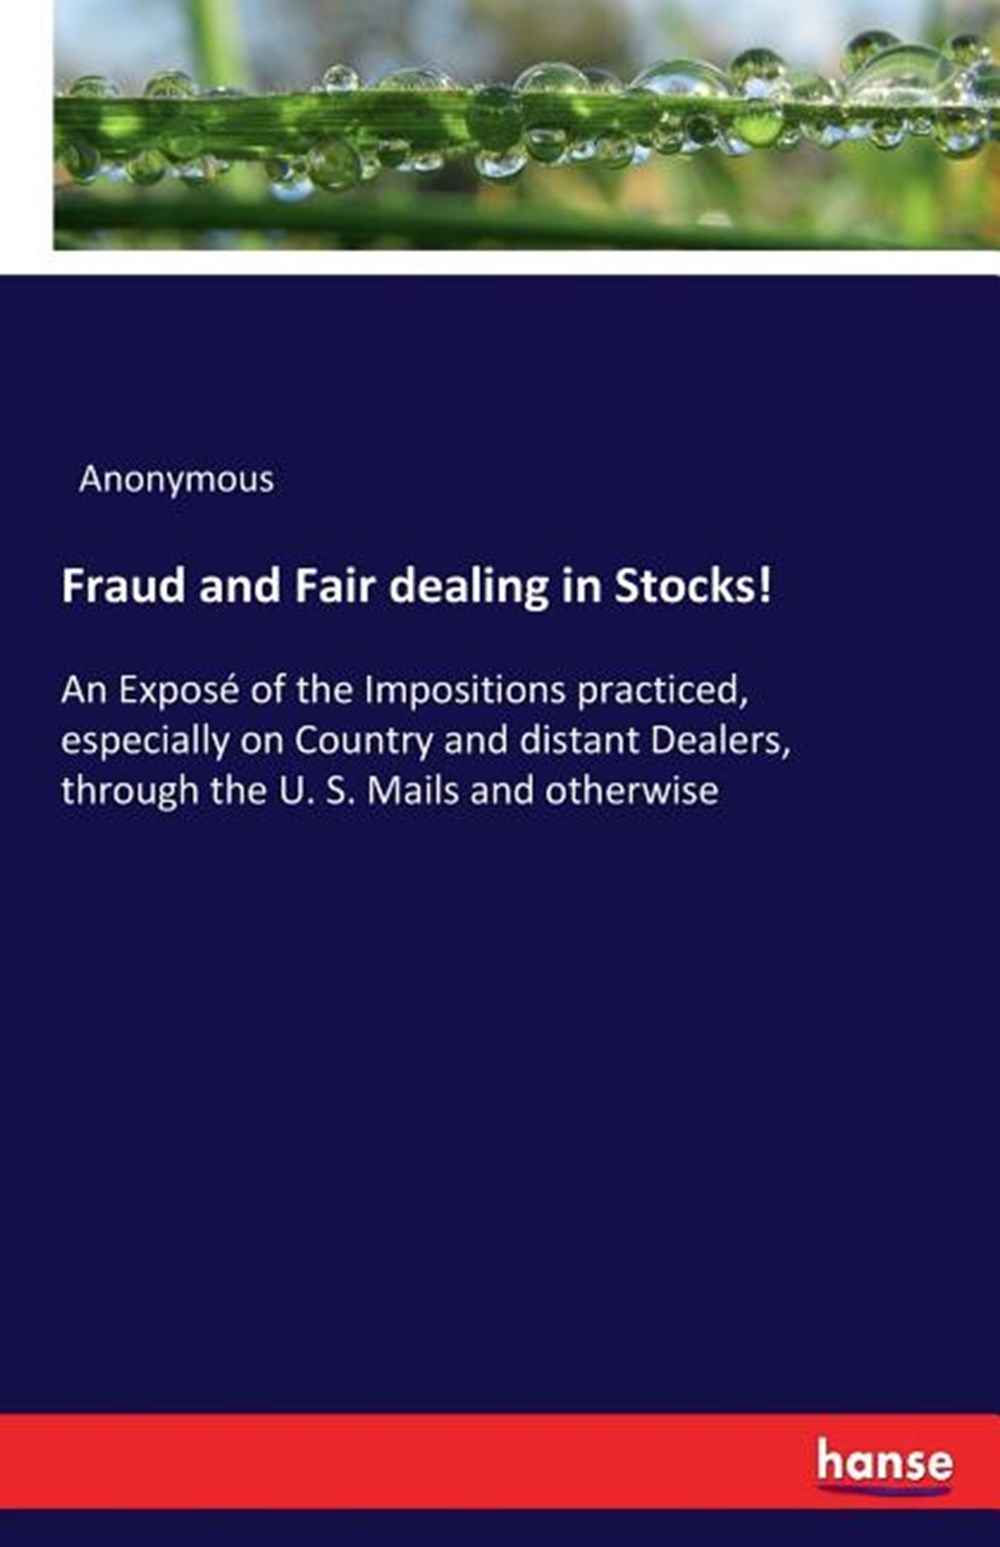 Fraud and Fair dealing in Stocks!: An Exposé of the Impositions practiced, especially on Country and